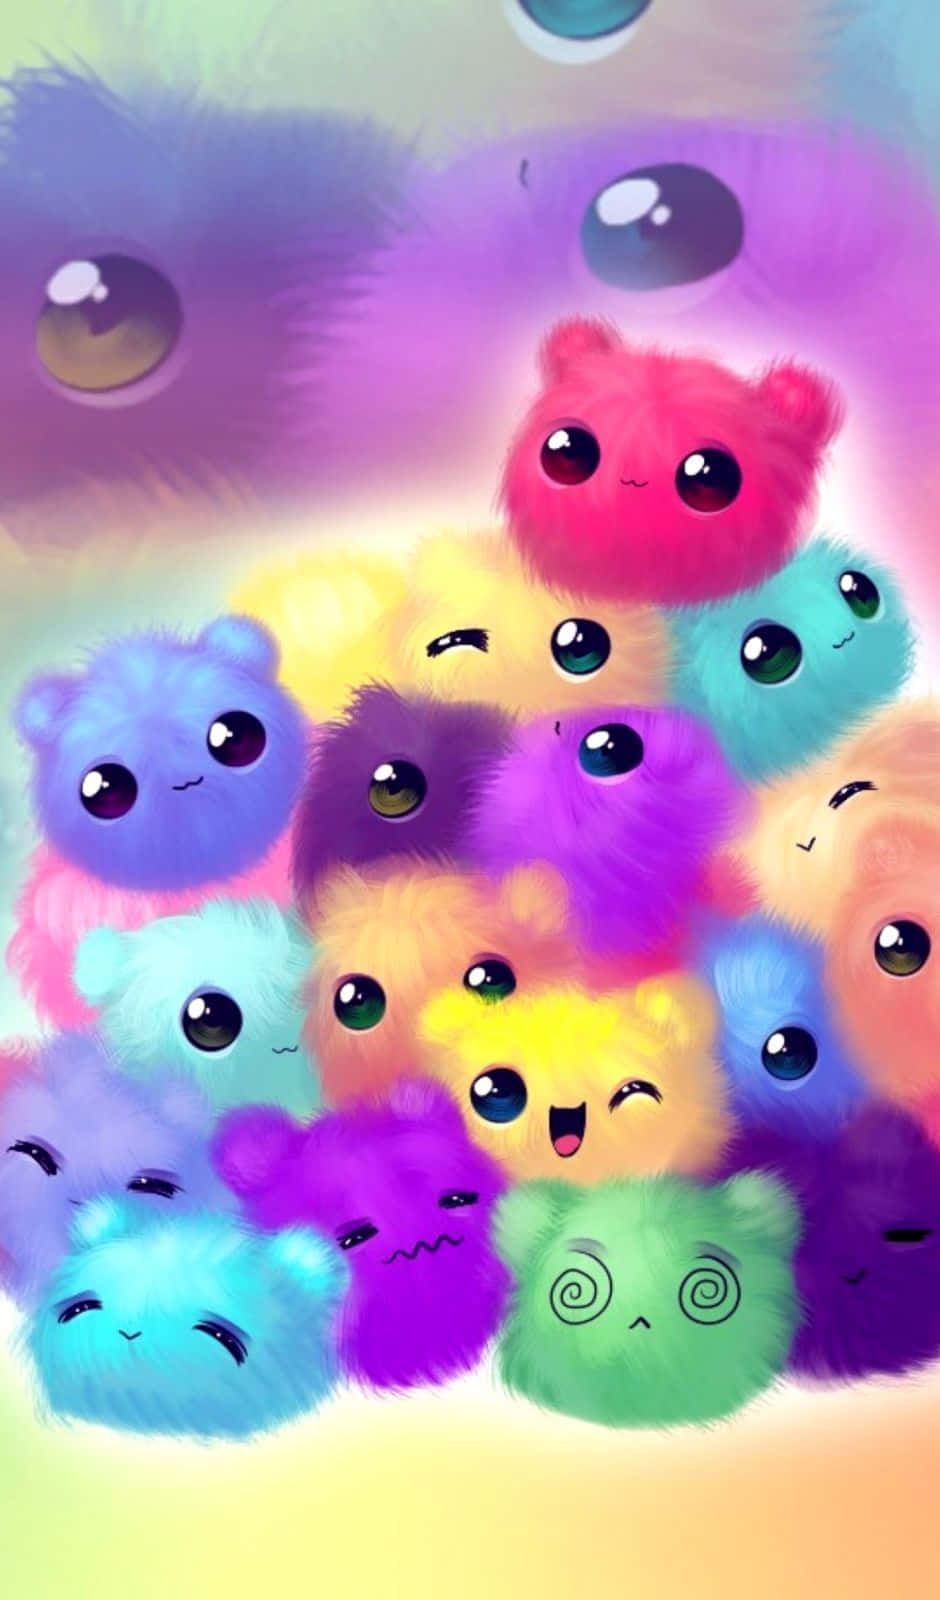 A Bunch Of Colorful Teddy Bears In A Rainbow Wallpaper